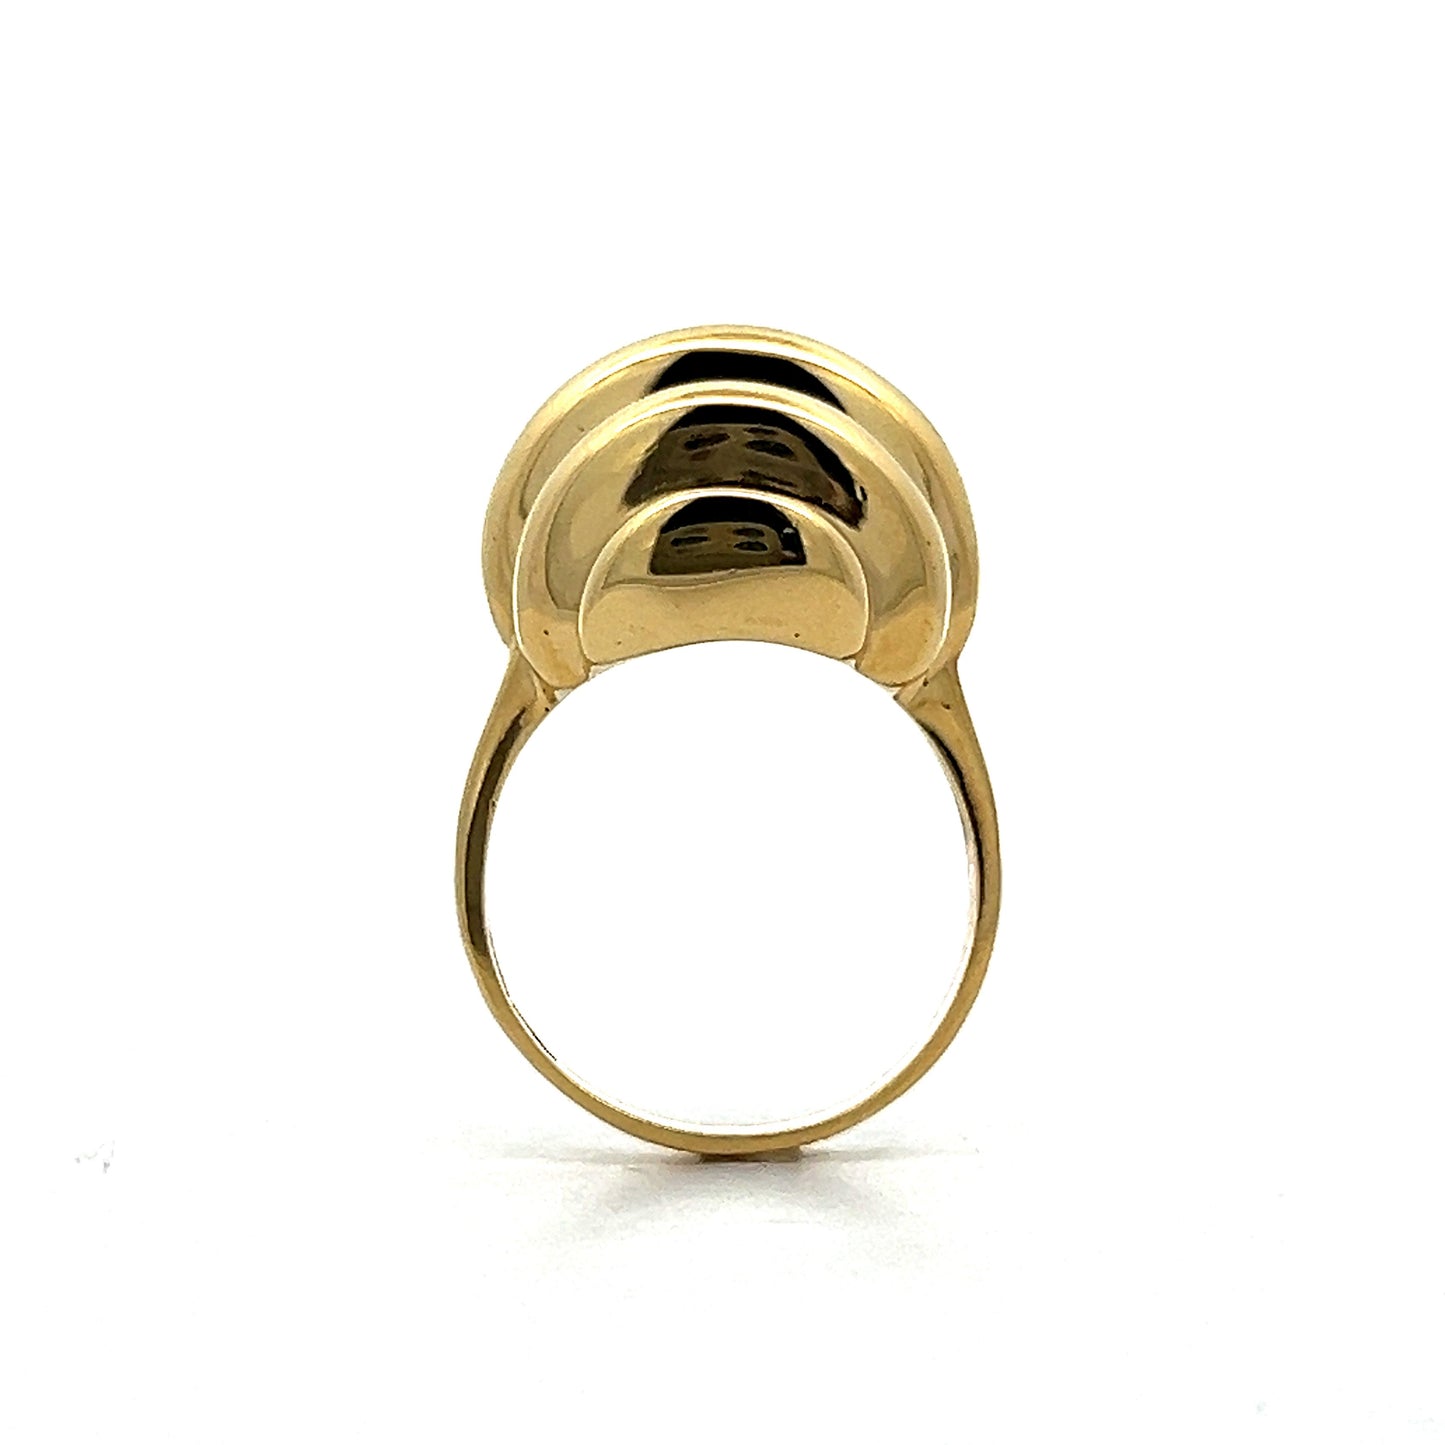 Beehive Cocktail Ring in 18k Yellow Gold